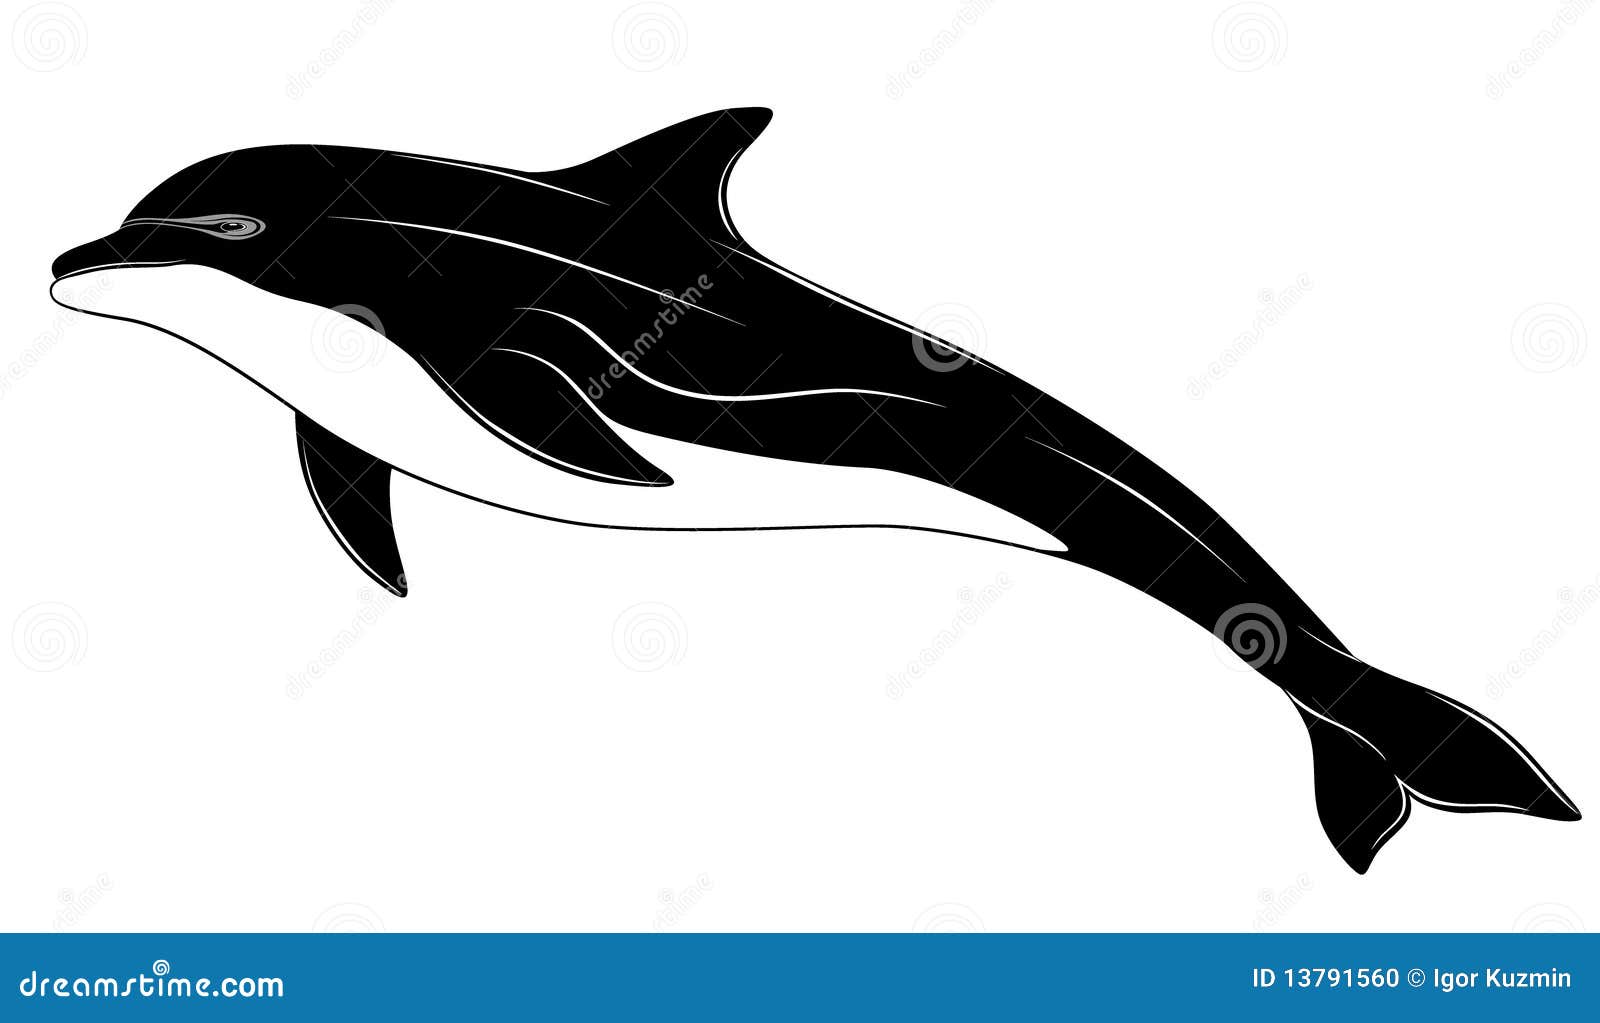 101 Best Simple Dolphin Tattoo Ideas That Will Blow Your Mind!